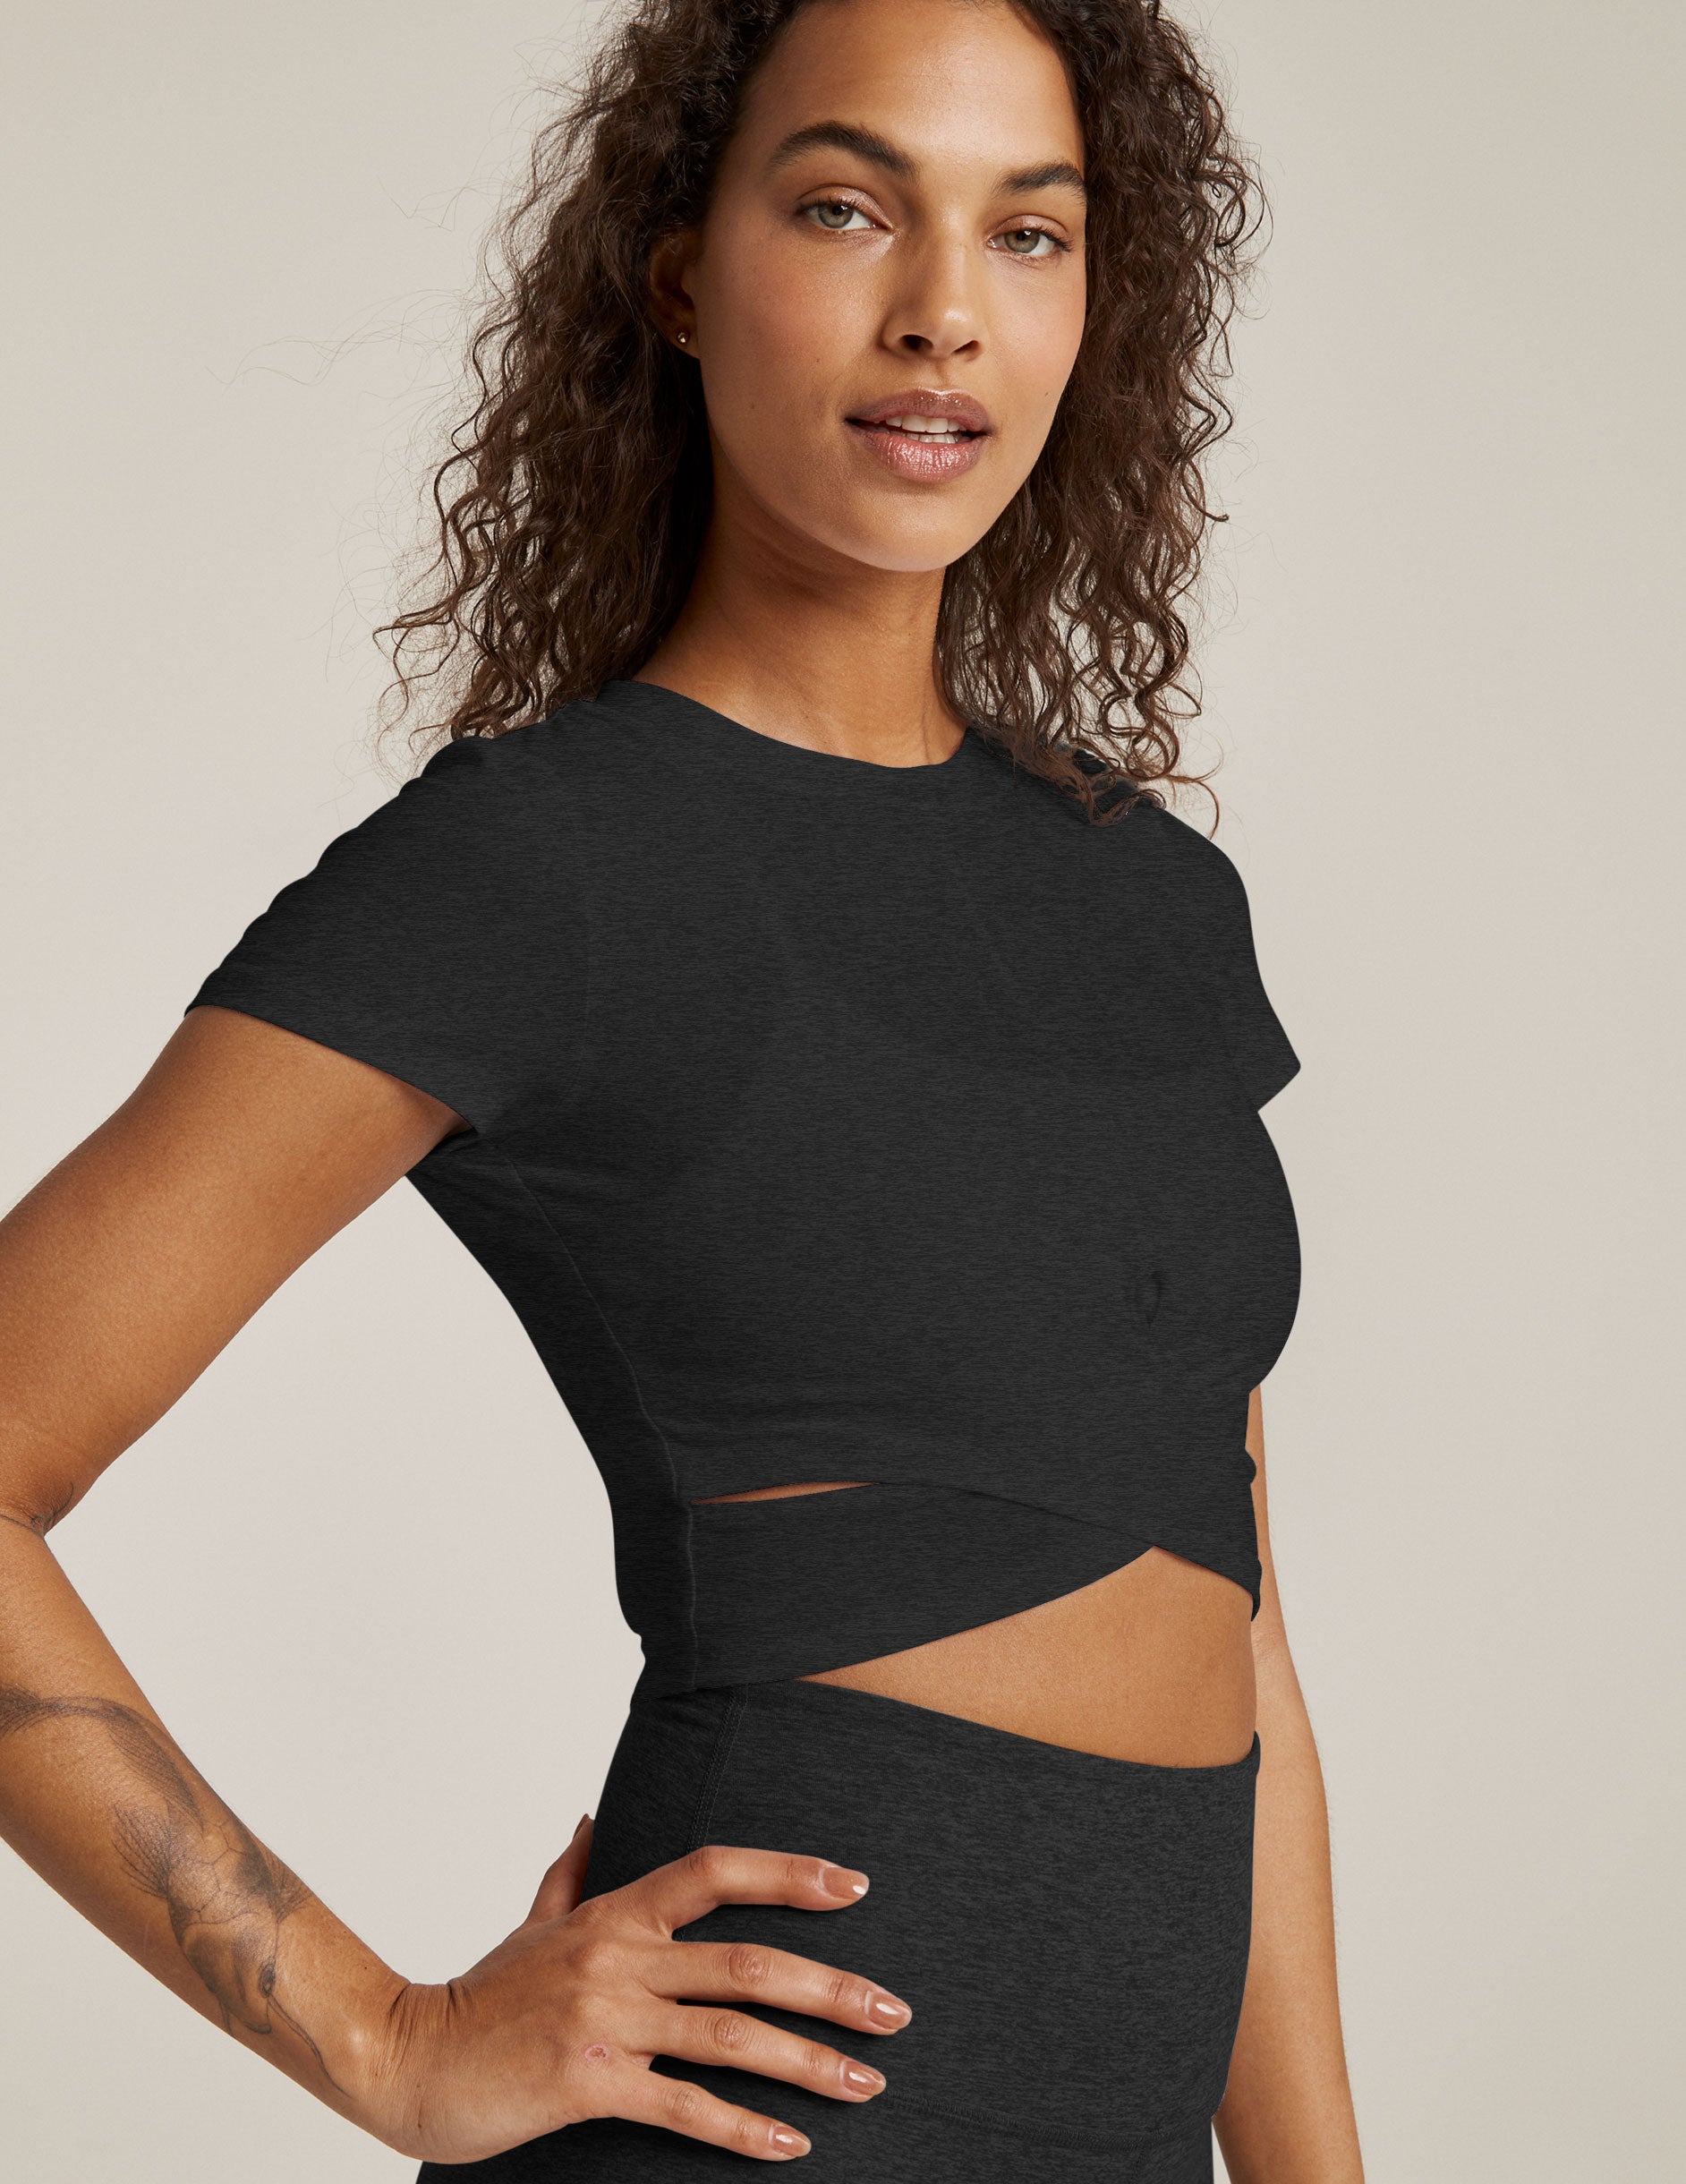 black short sleeve top with criss cross detail at front